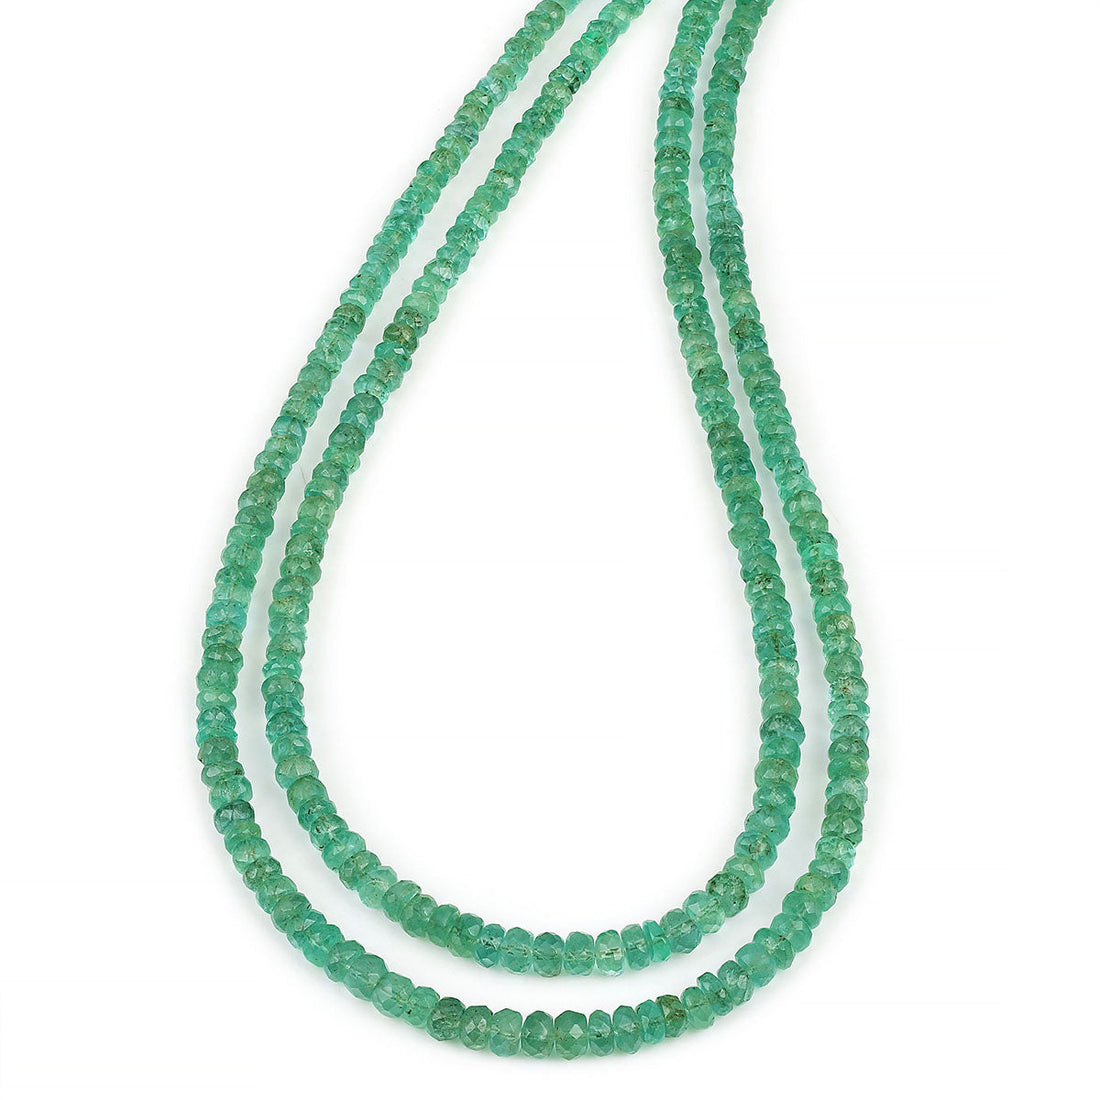 Emerald Beads Layered Silver Necklace